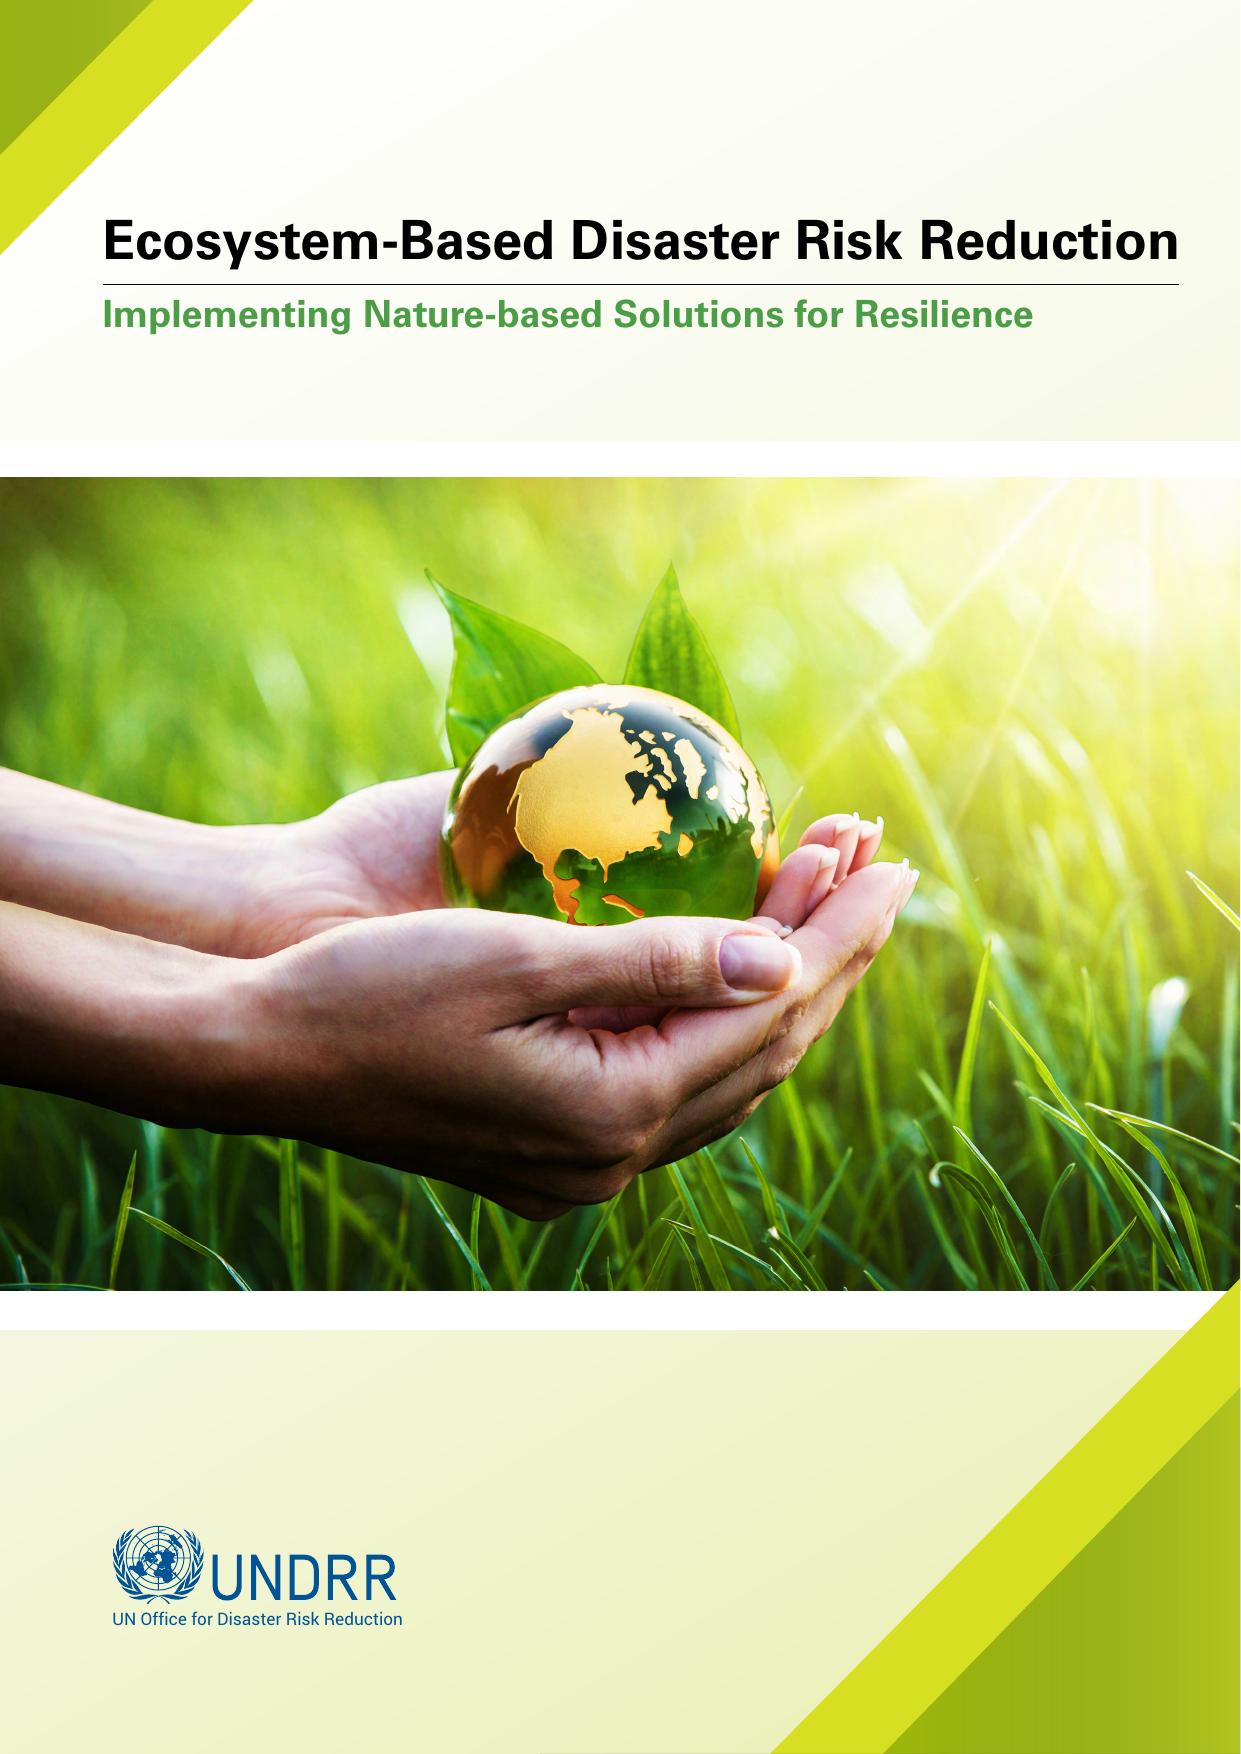 UNDRR Asia-Pacific Ecosystem-Based Disaster Risk Reduction Implementing Nature-based Solutions for Resilience